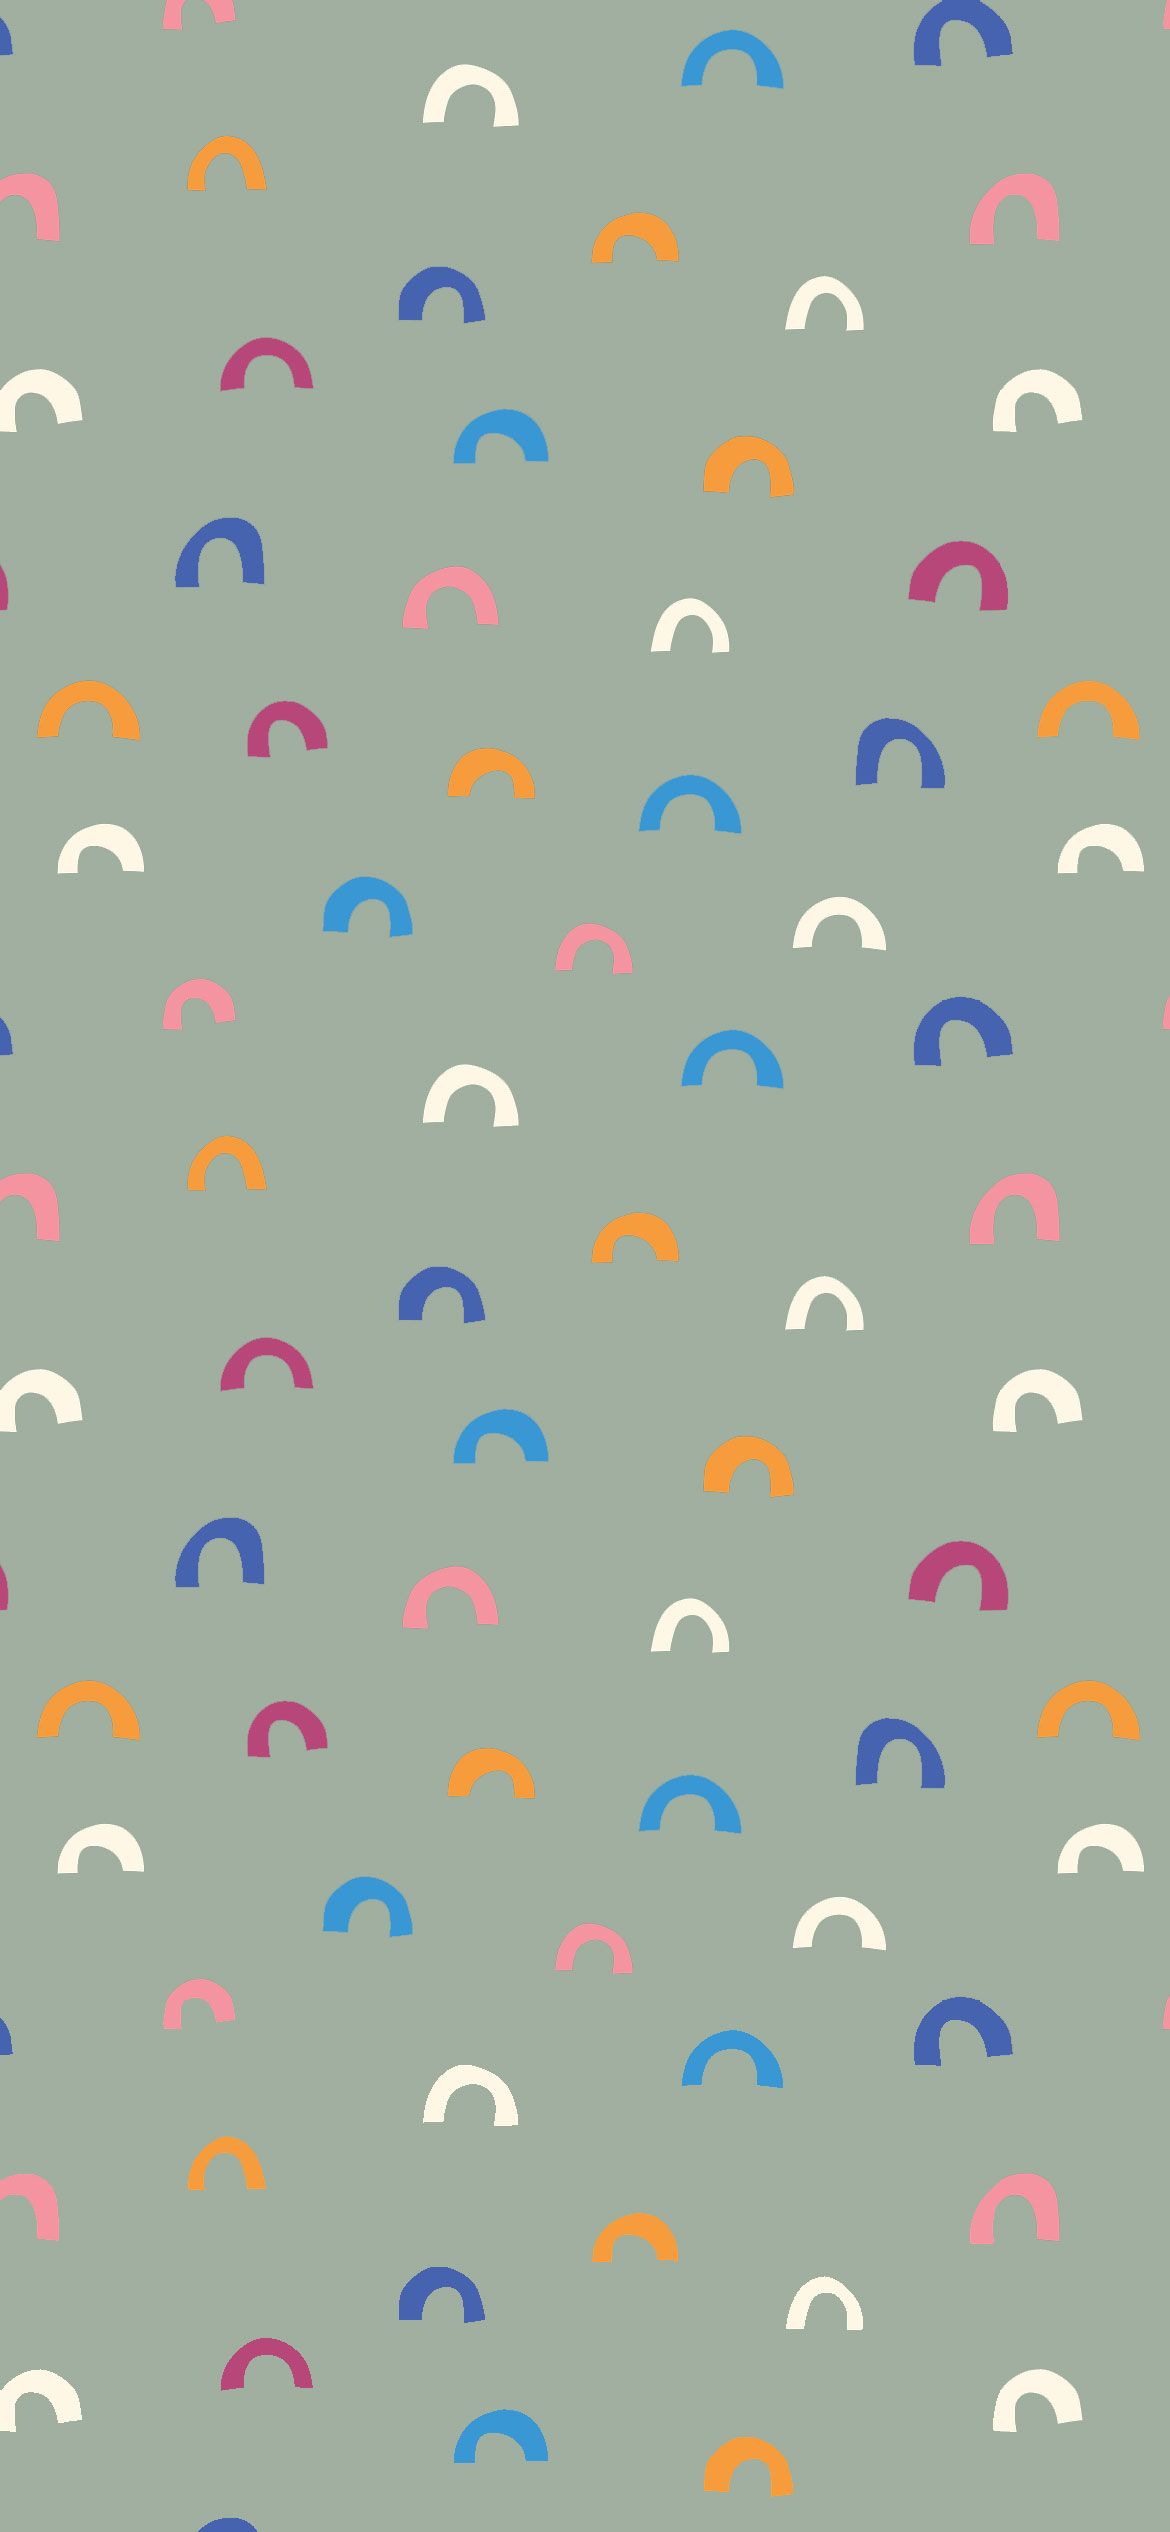 Sage Green Aesthetic Wallpaper : Colorful Rainbow on Sage Green Wallpaper